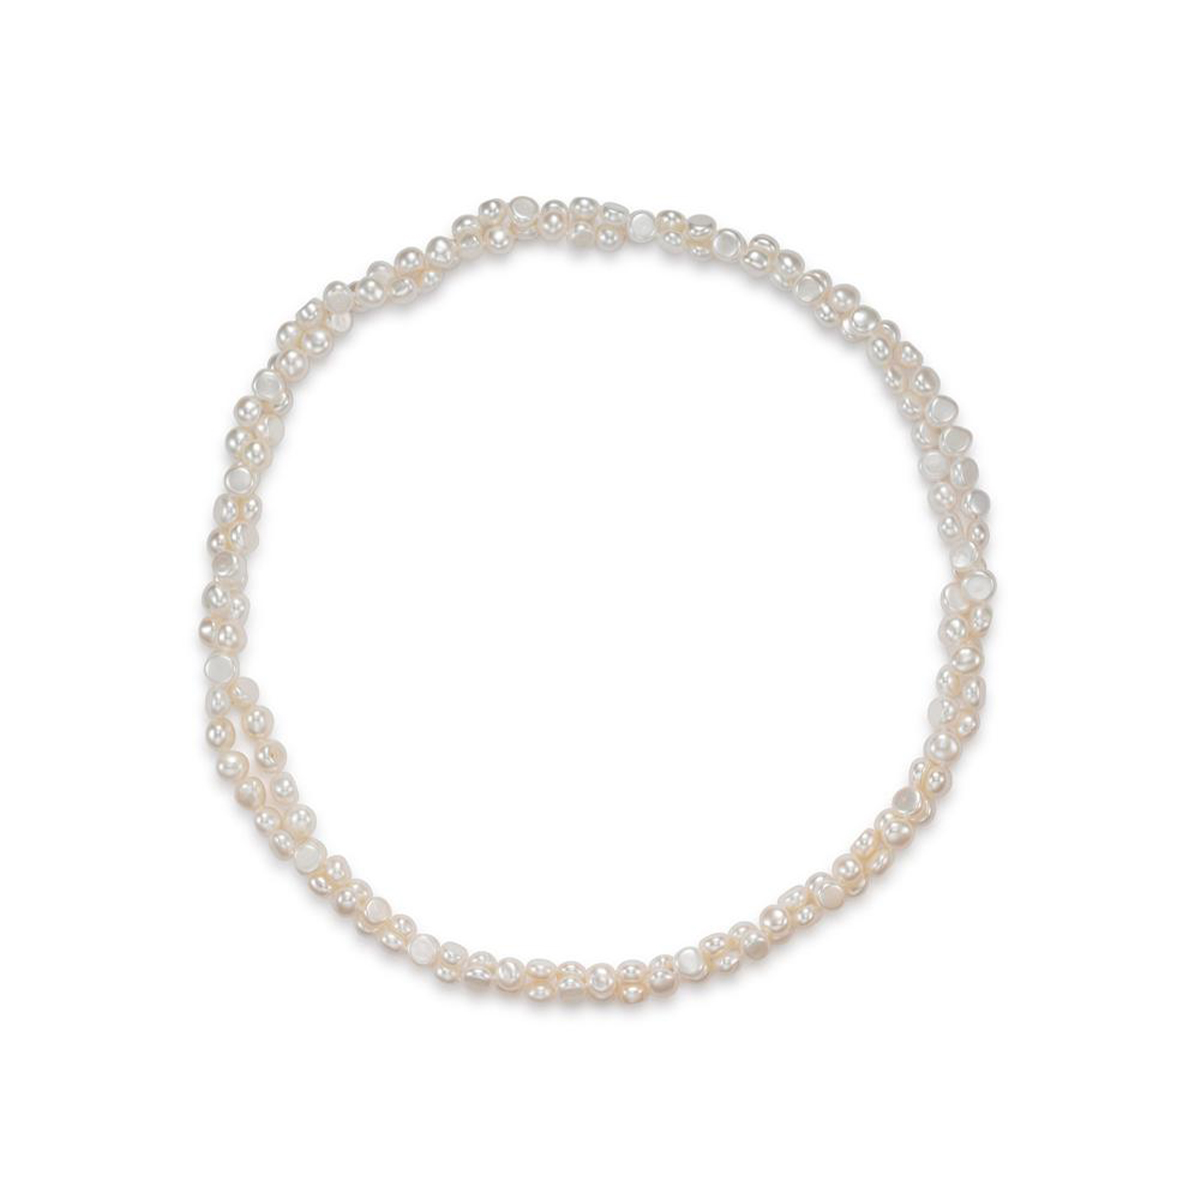 54-Inch 8-9 mm White Freshwater Pearl Necklace